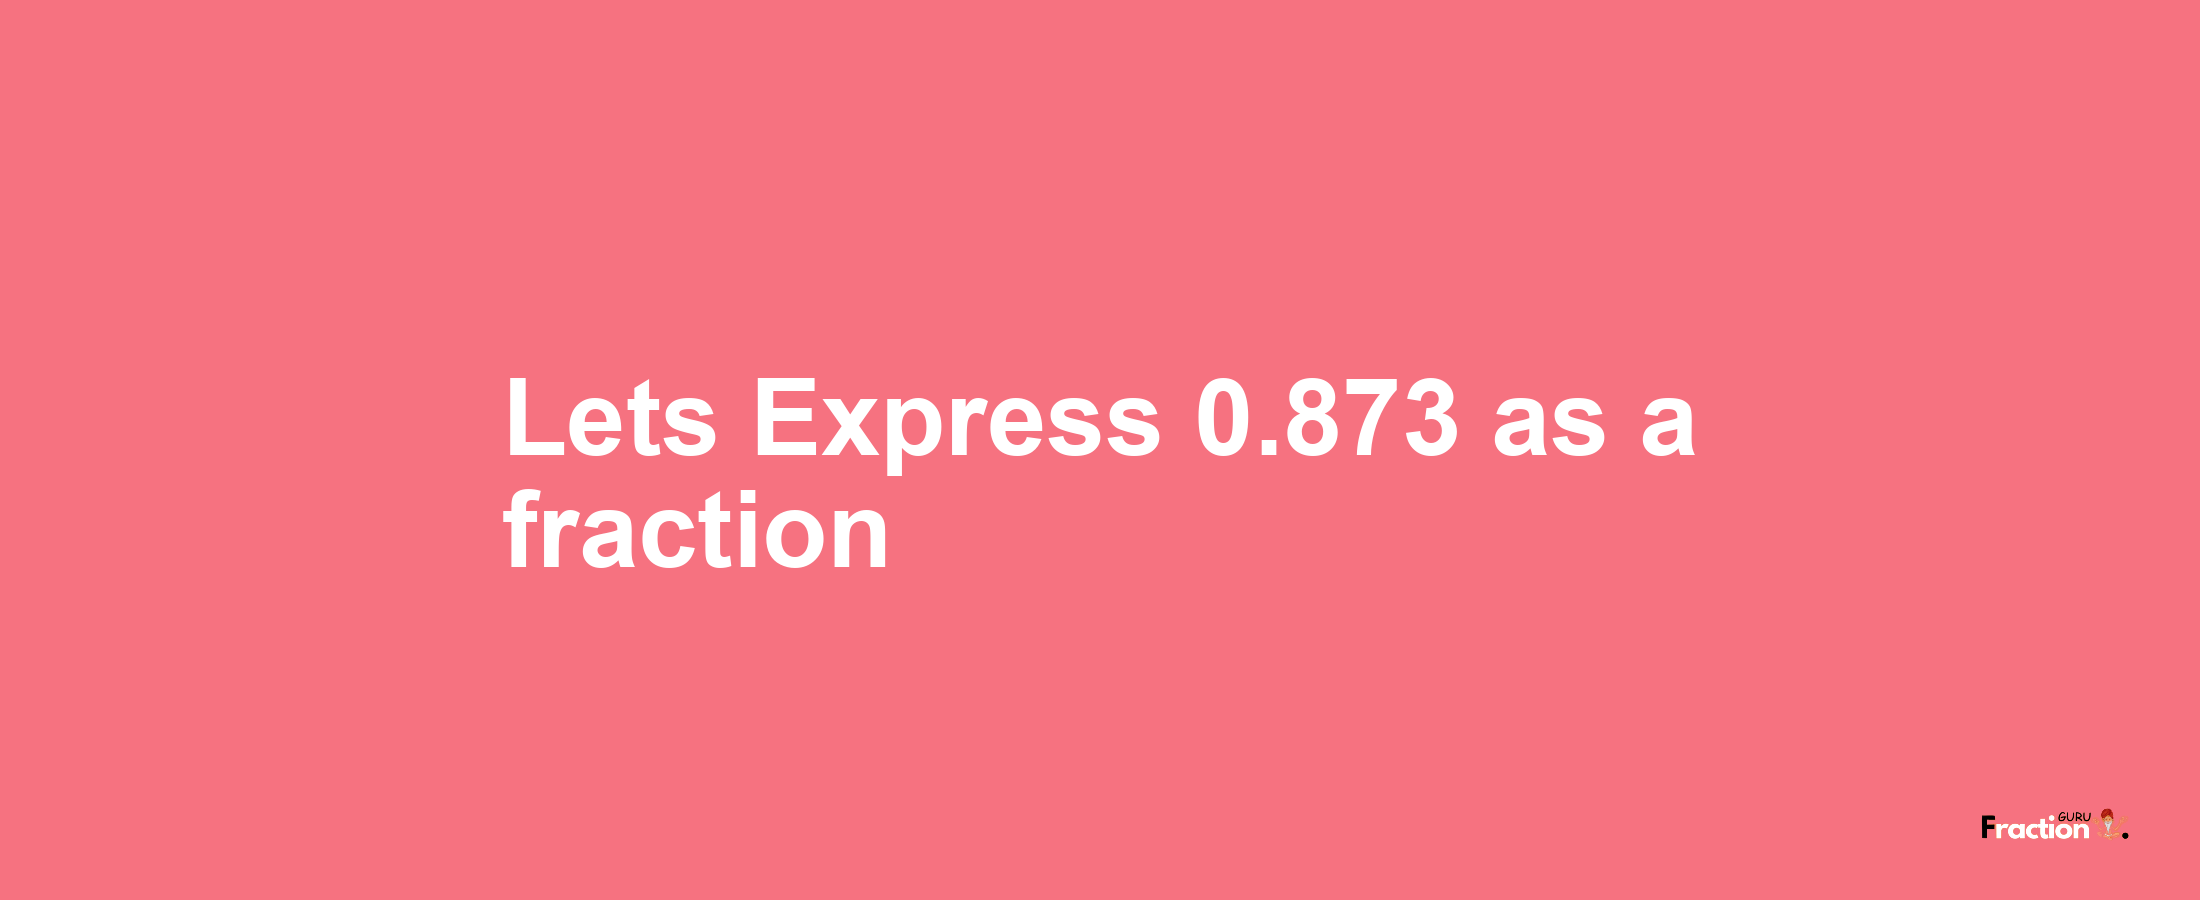 Lets Express 0.873 as afraction